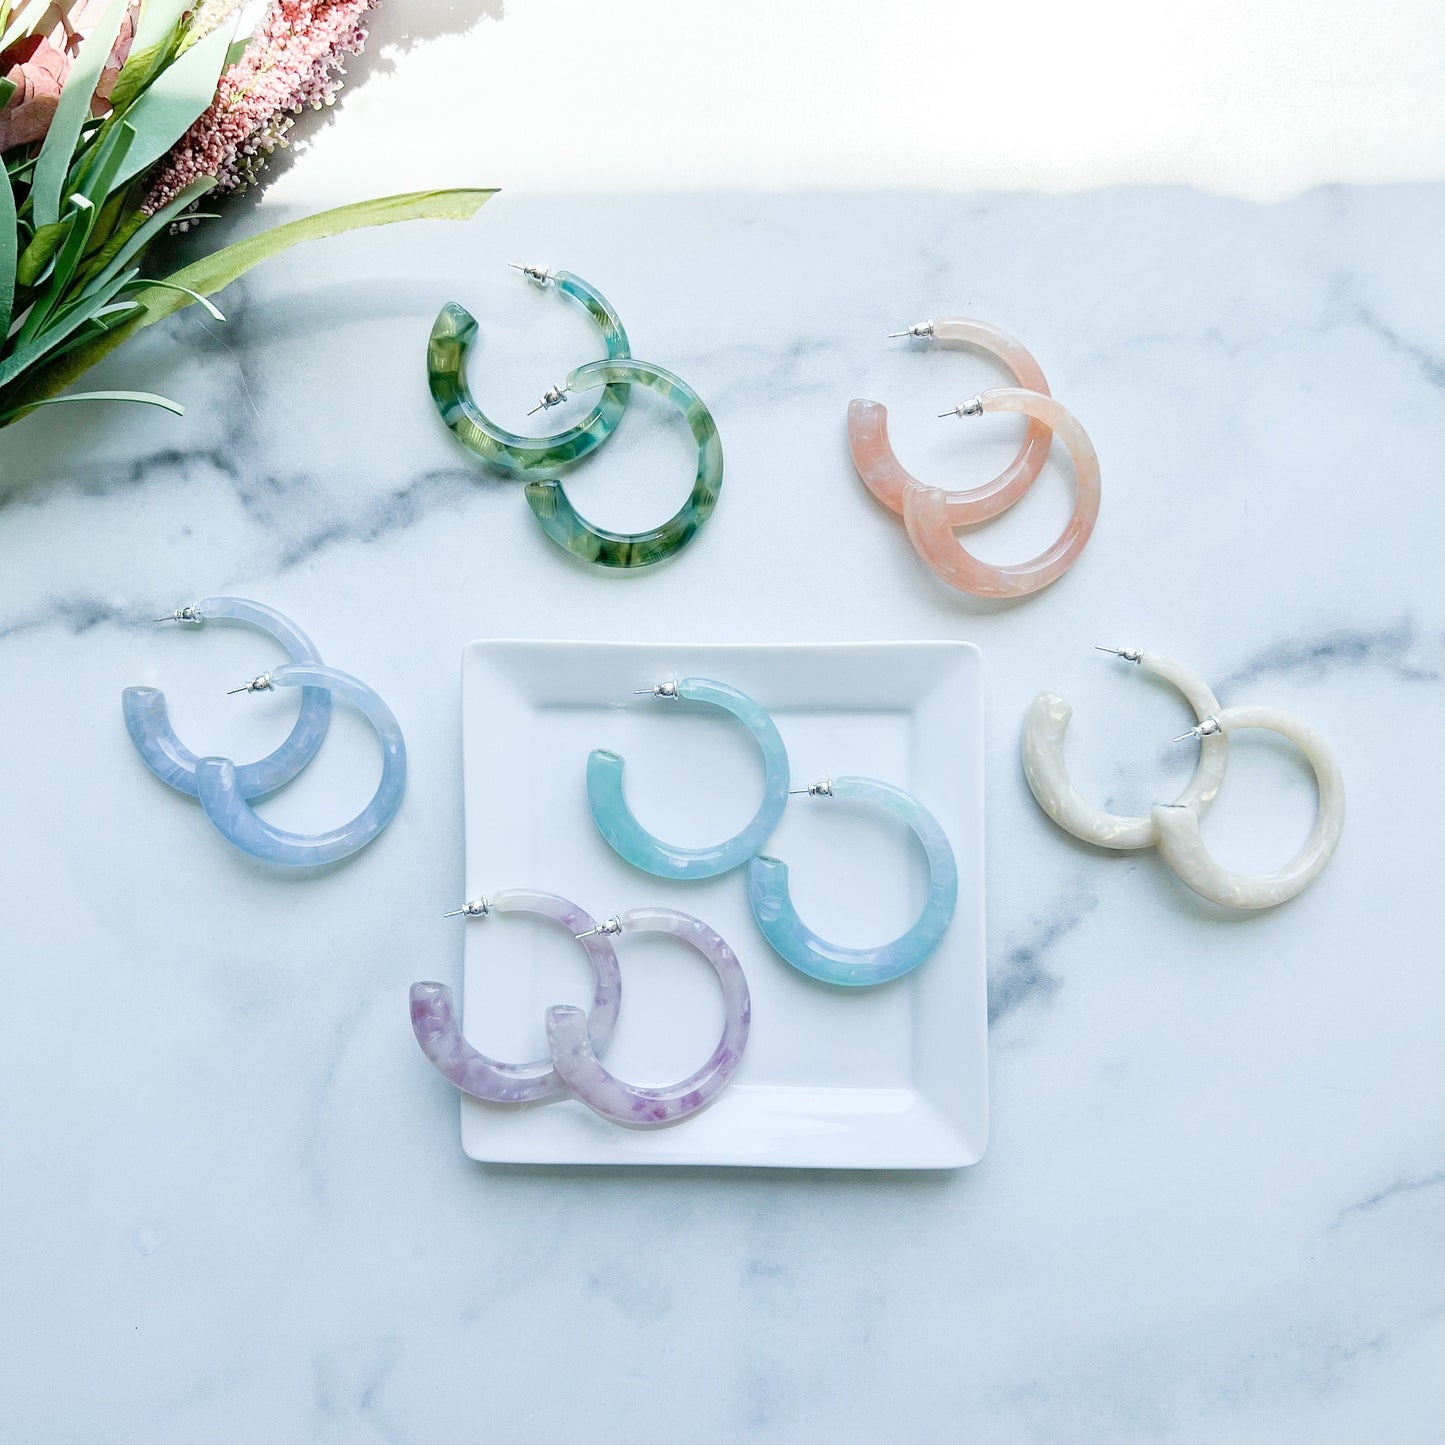 Sfera Hoop Collection | 55mm Large Statement Geometric Square Round Italian Cellulose Acetate Hoops 925 Sterling Silver Posts